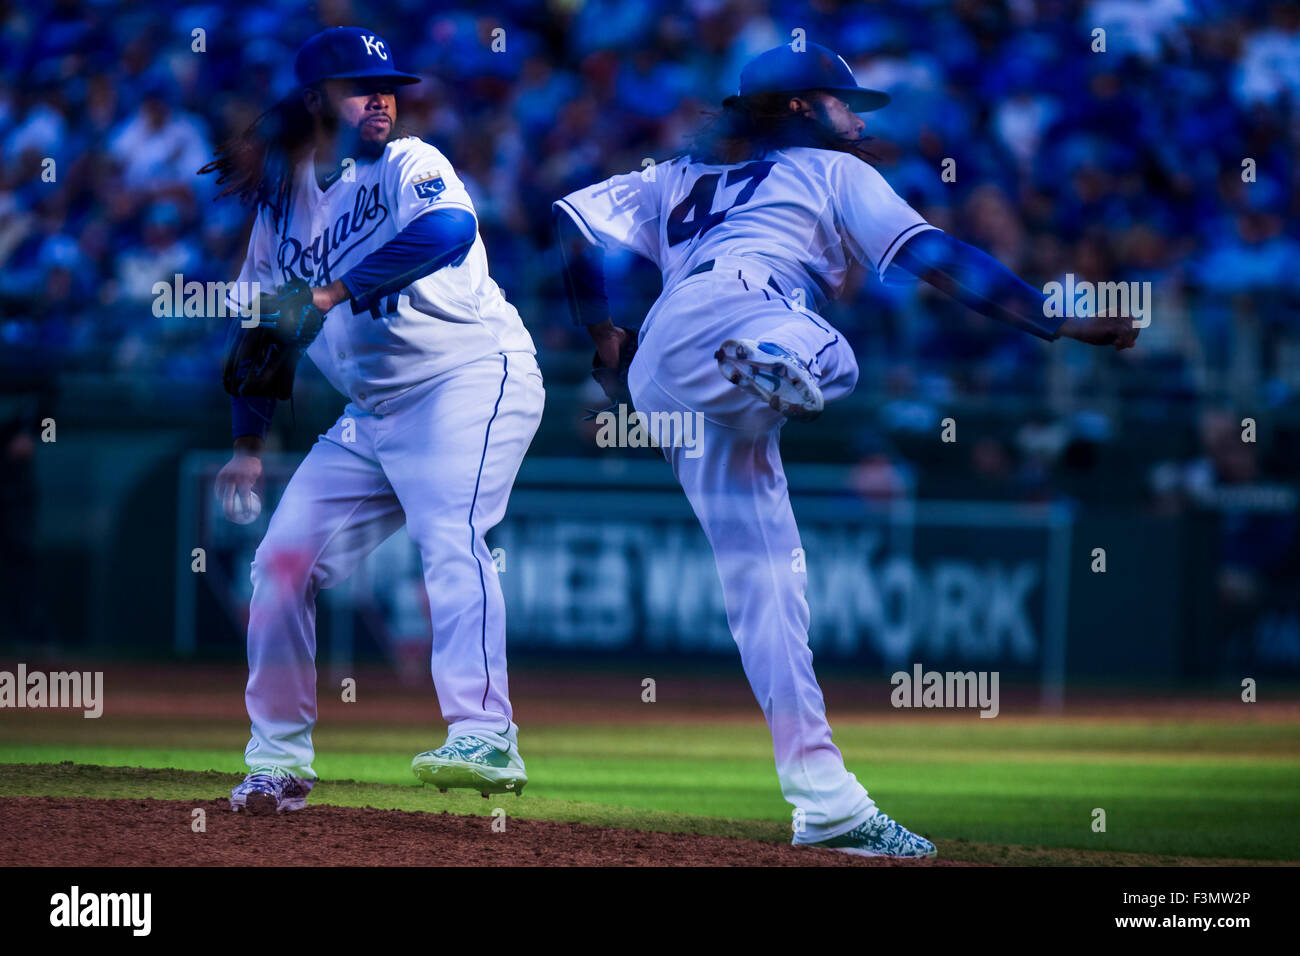 Kansas City, MO, USA. 09th Oct, 2015. Johnny Cueto #47 of the Kansas City Royals pitches in the fifth inning during Game 2 of the Divisional Series Playoff between the Houston Astros and the Kansas City Royals at Kauffman Stadium in Kansas City, MO. Kyle Rivas/CSM/Alamy Live News Stock Photo